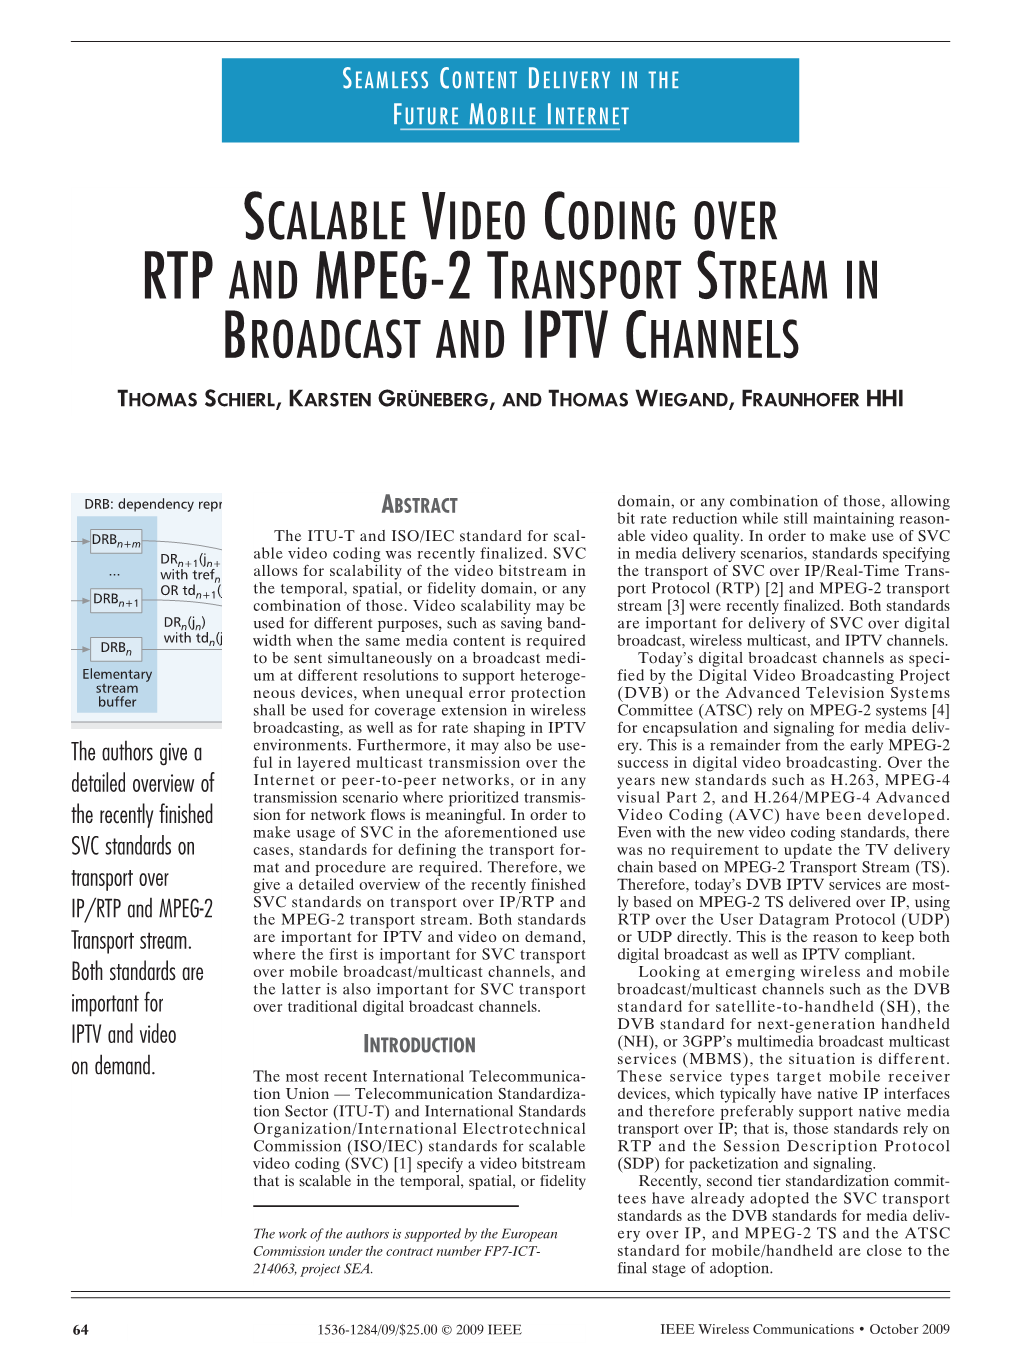 Scalable Video Coding Over Rtp and Mpeg-2 Transport Stream in Broadcast and Iptv Channels